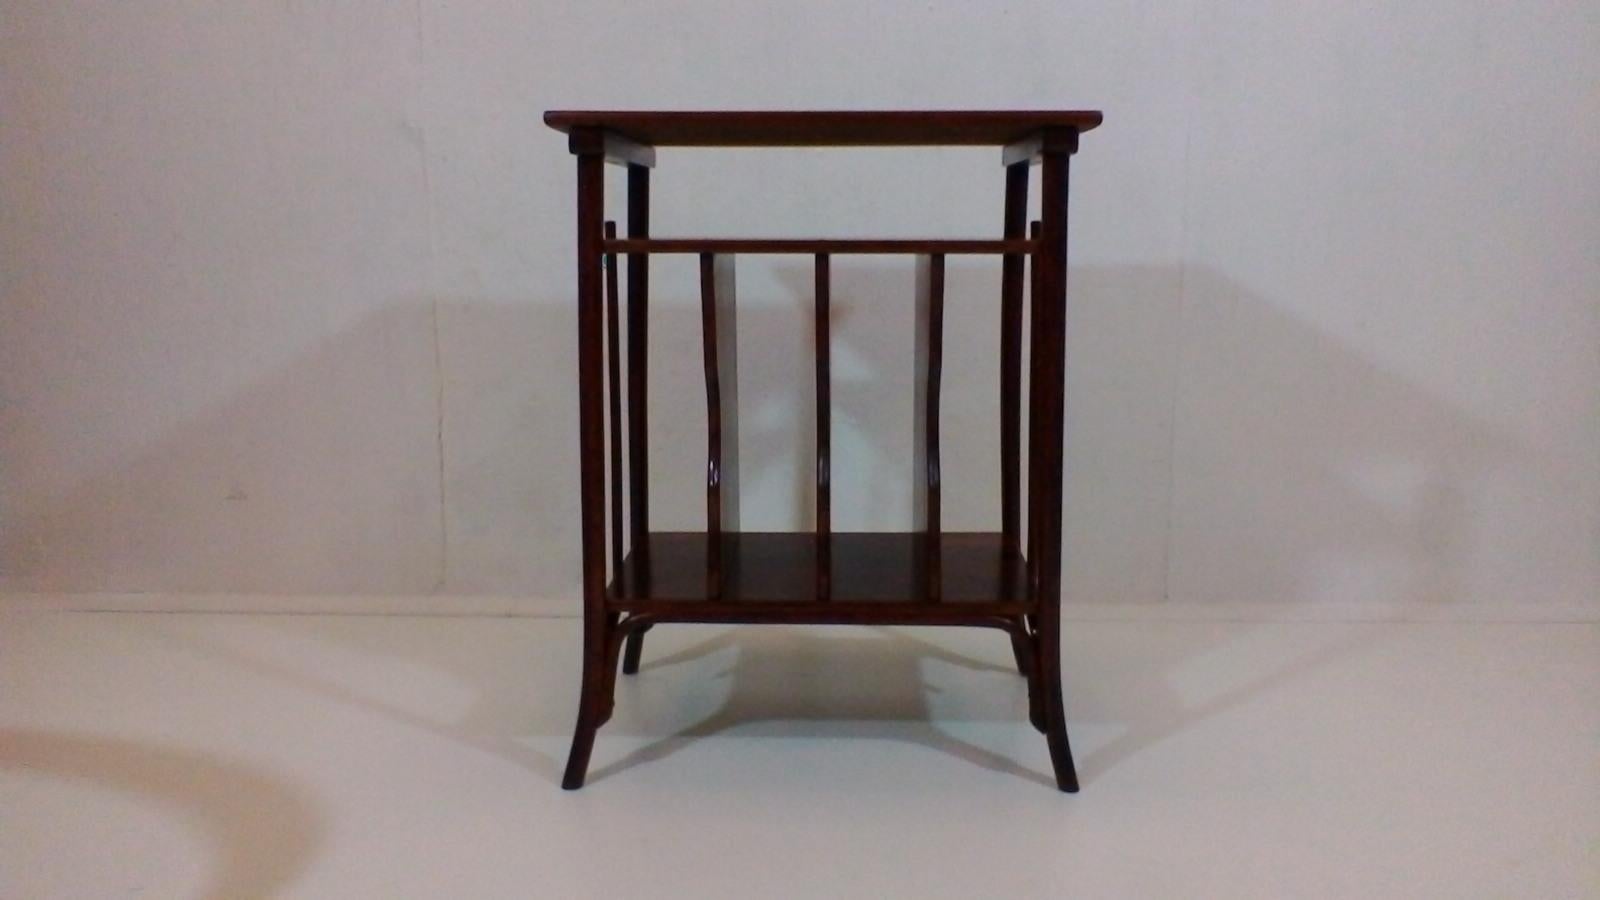 The item made of beech wood with shellac varnish in original wood shade. Manufacturer is Thonet-Bystrice pod Hostýnem. The item is after complete renovation.